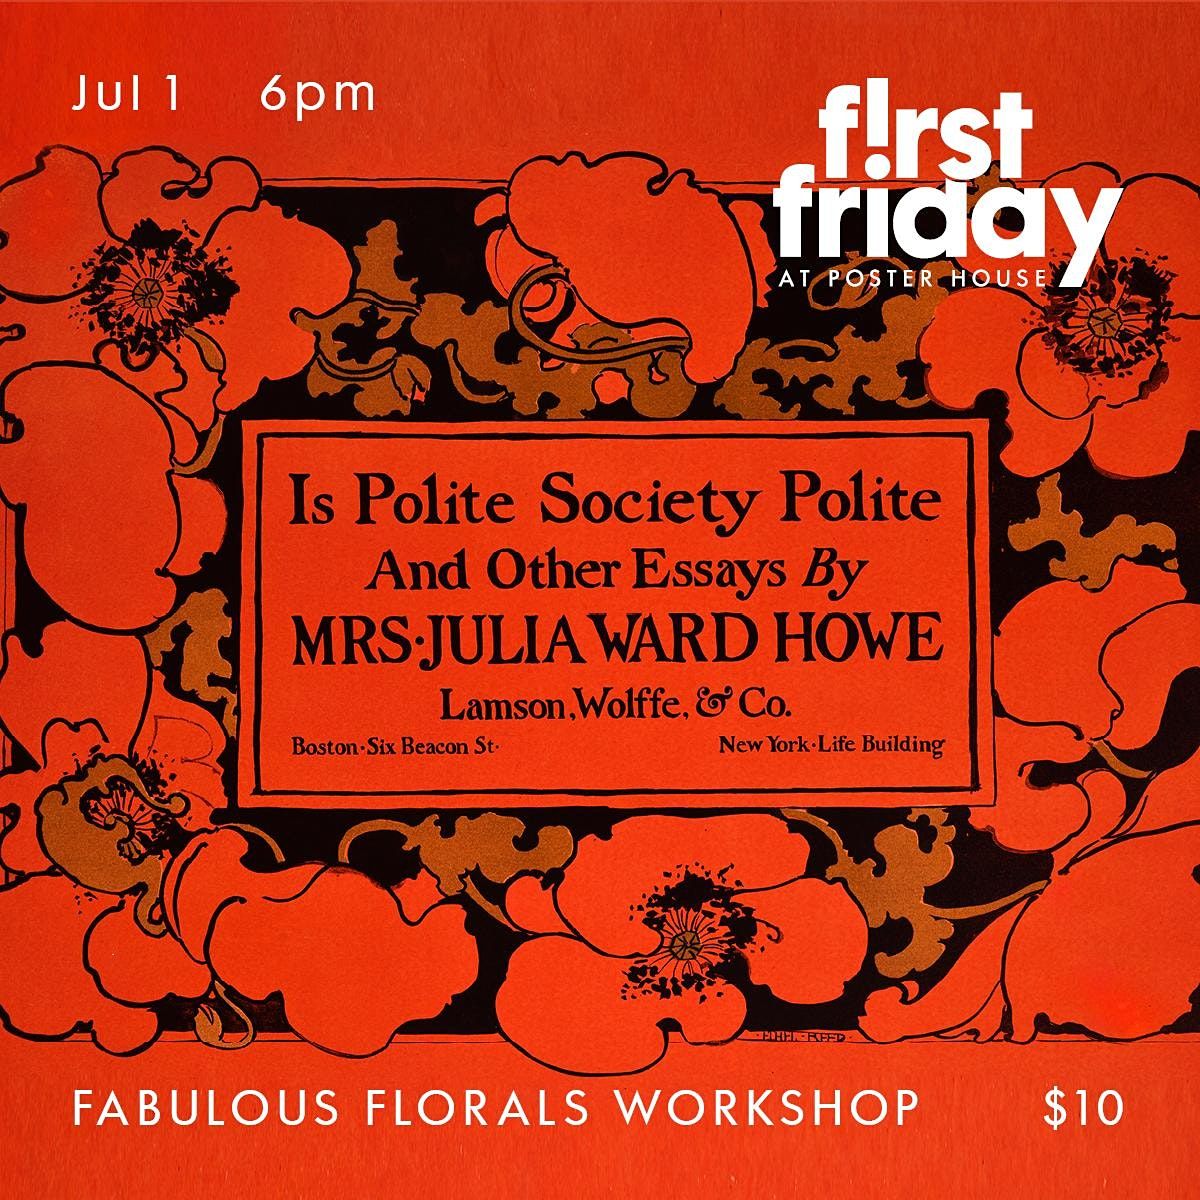 First Friday: Fabulous Florals Workshop